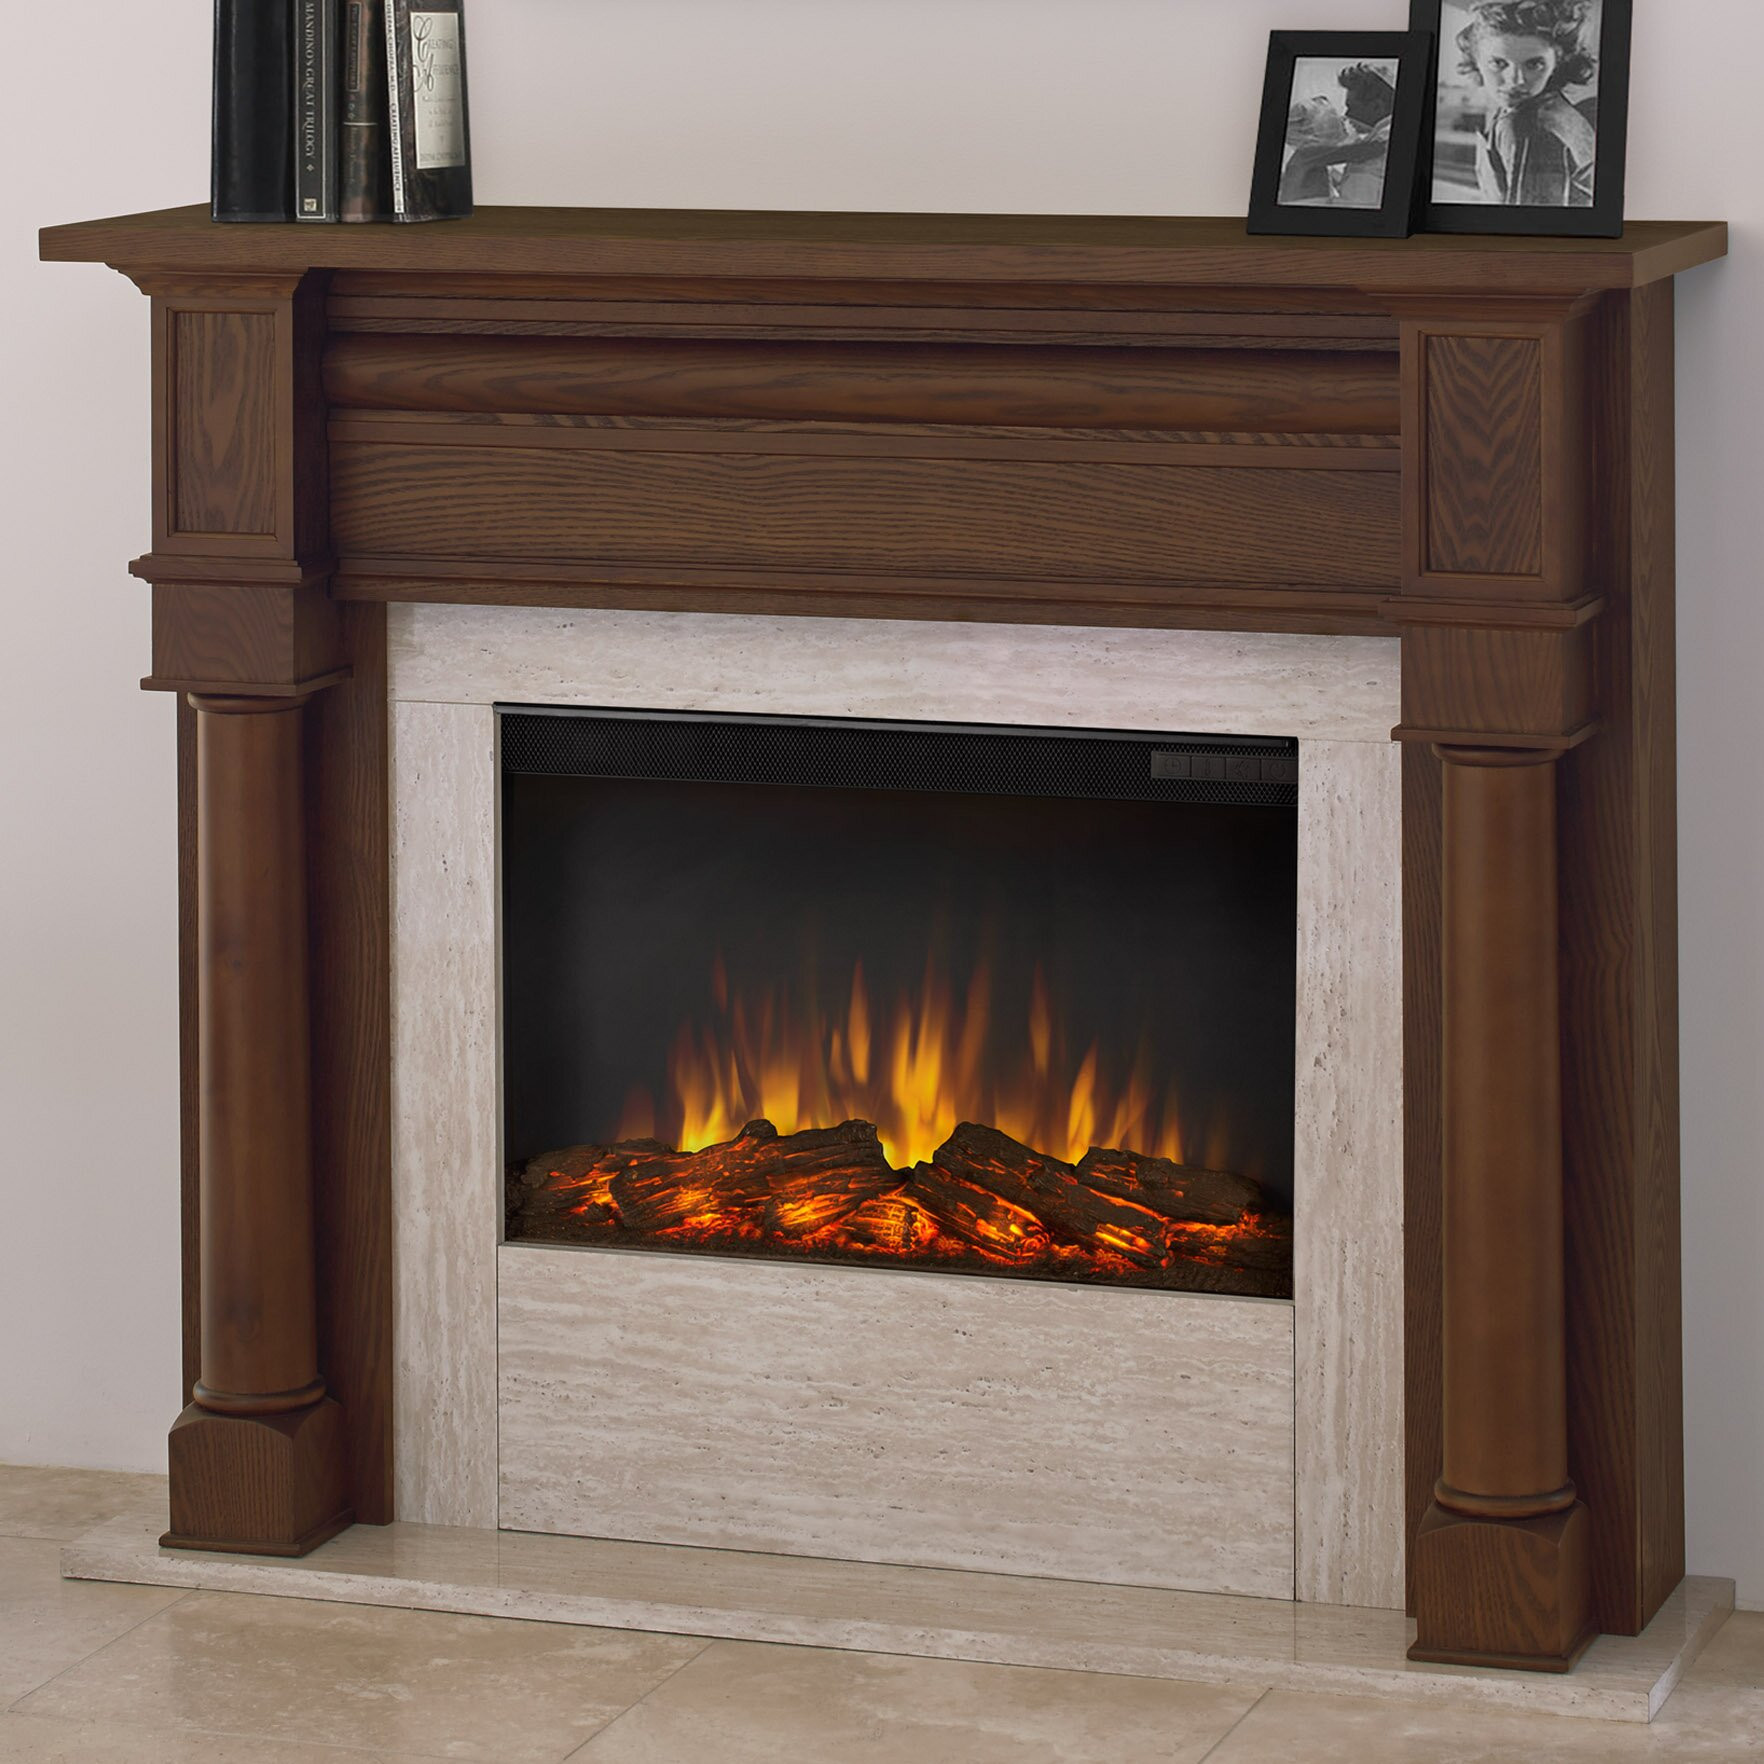 Real Flame Electric Fireplace Reviews
 Real Flame Berkeley Electric Fireplace & Reviews